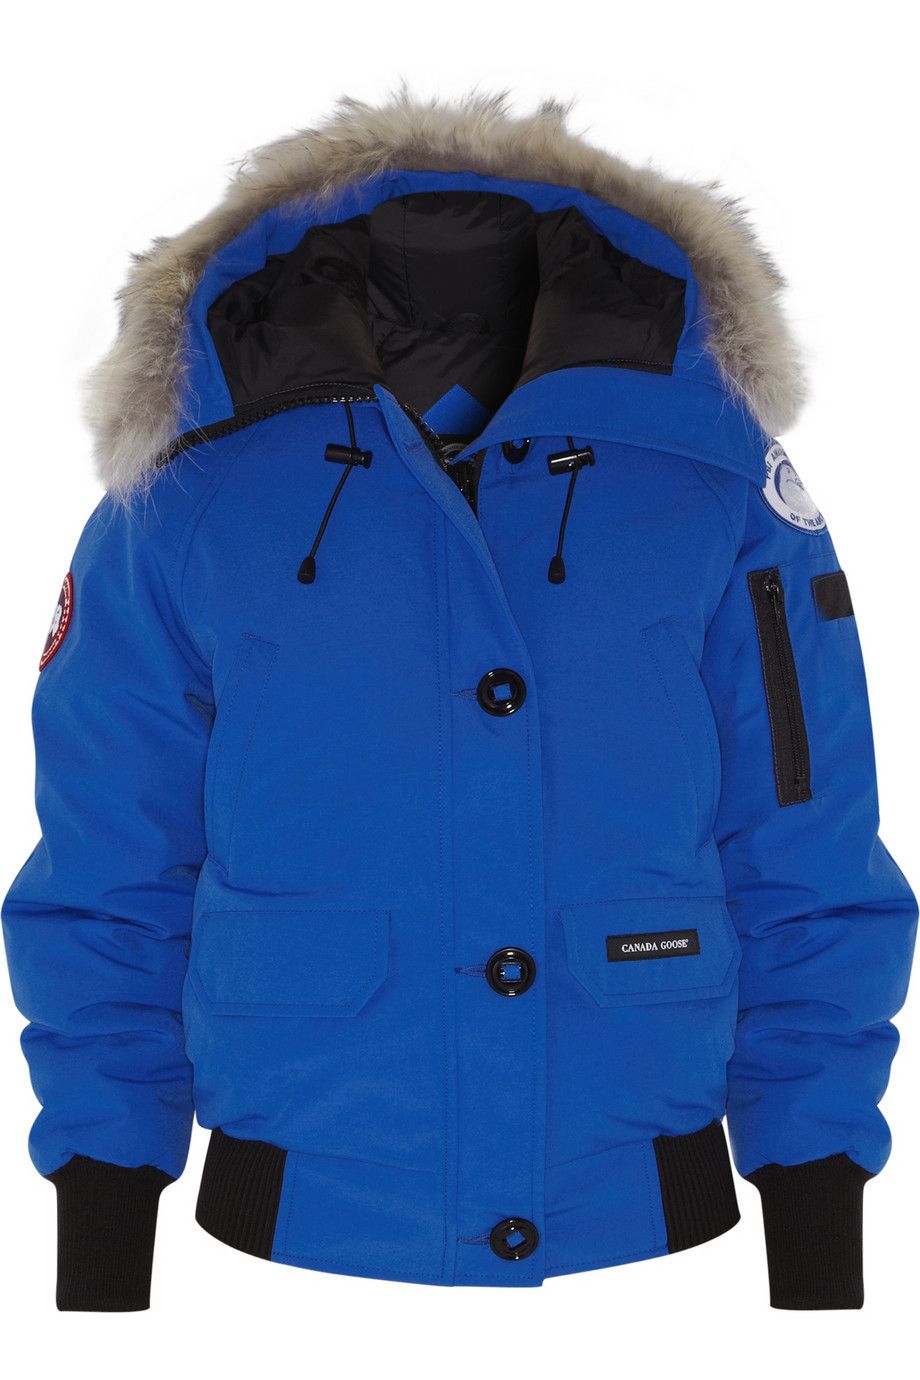 Clothing, Blue, Jacket, Sleeve, Collar, Textile, Outerwear, Coat, Electric blue, Hood, 